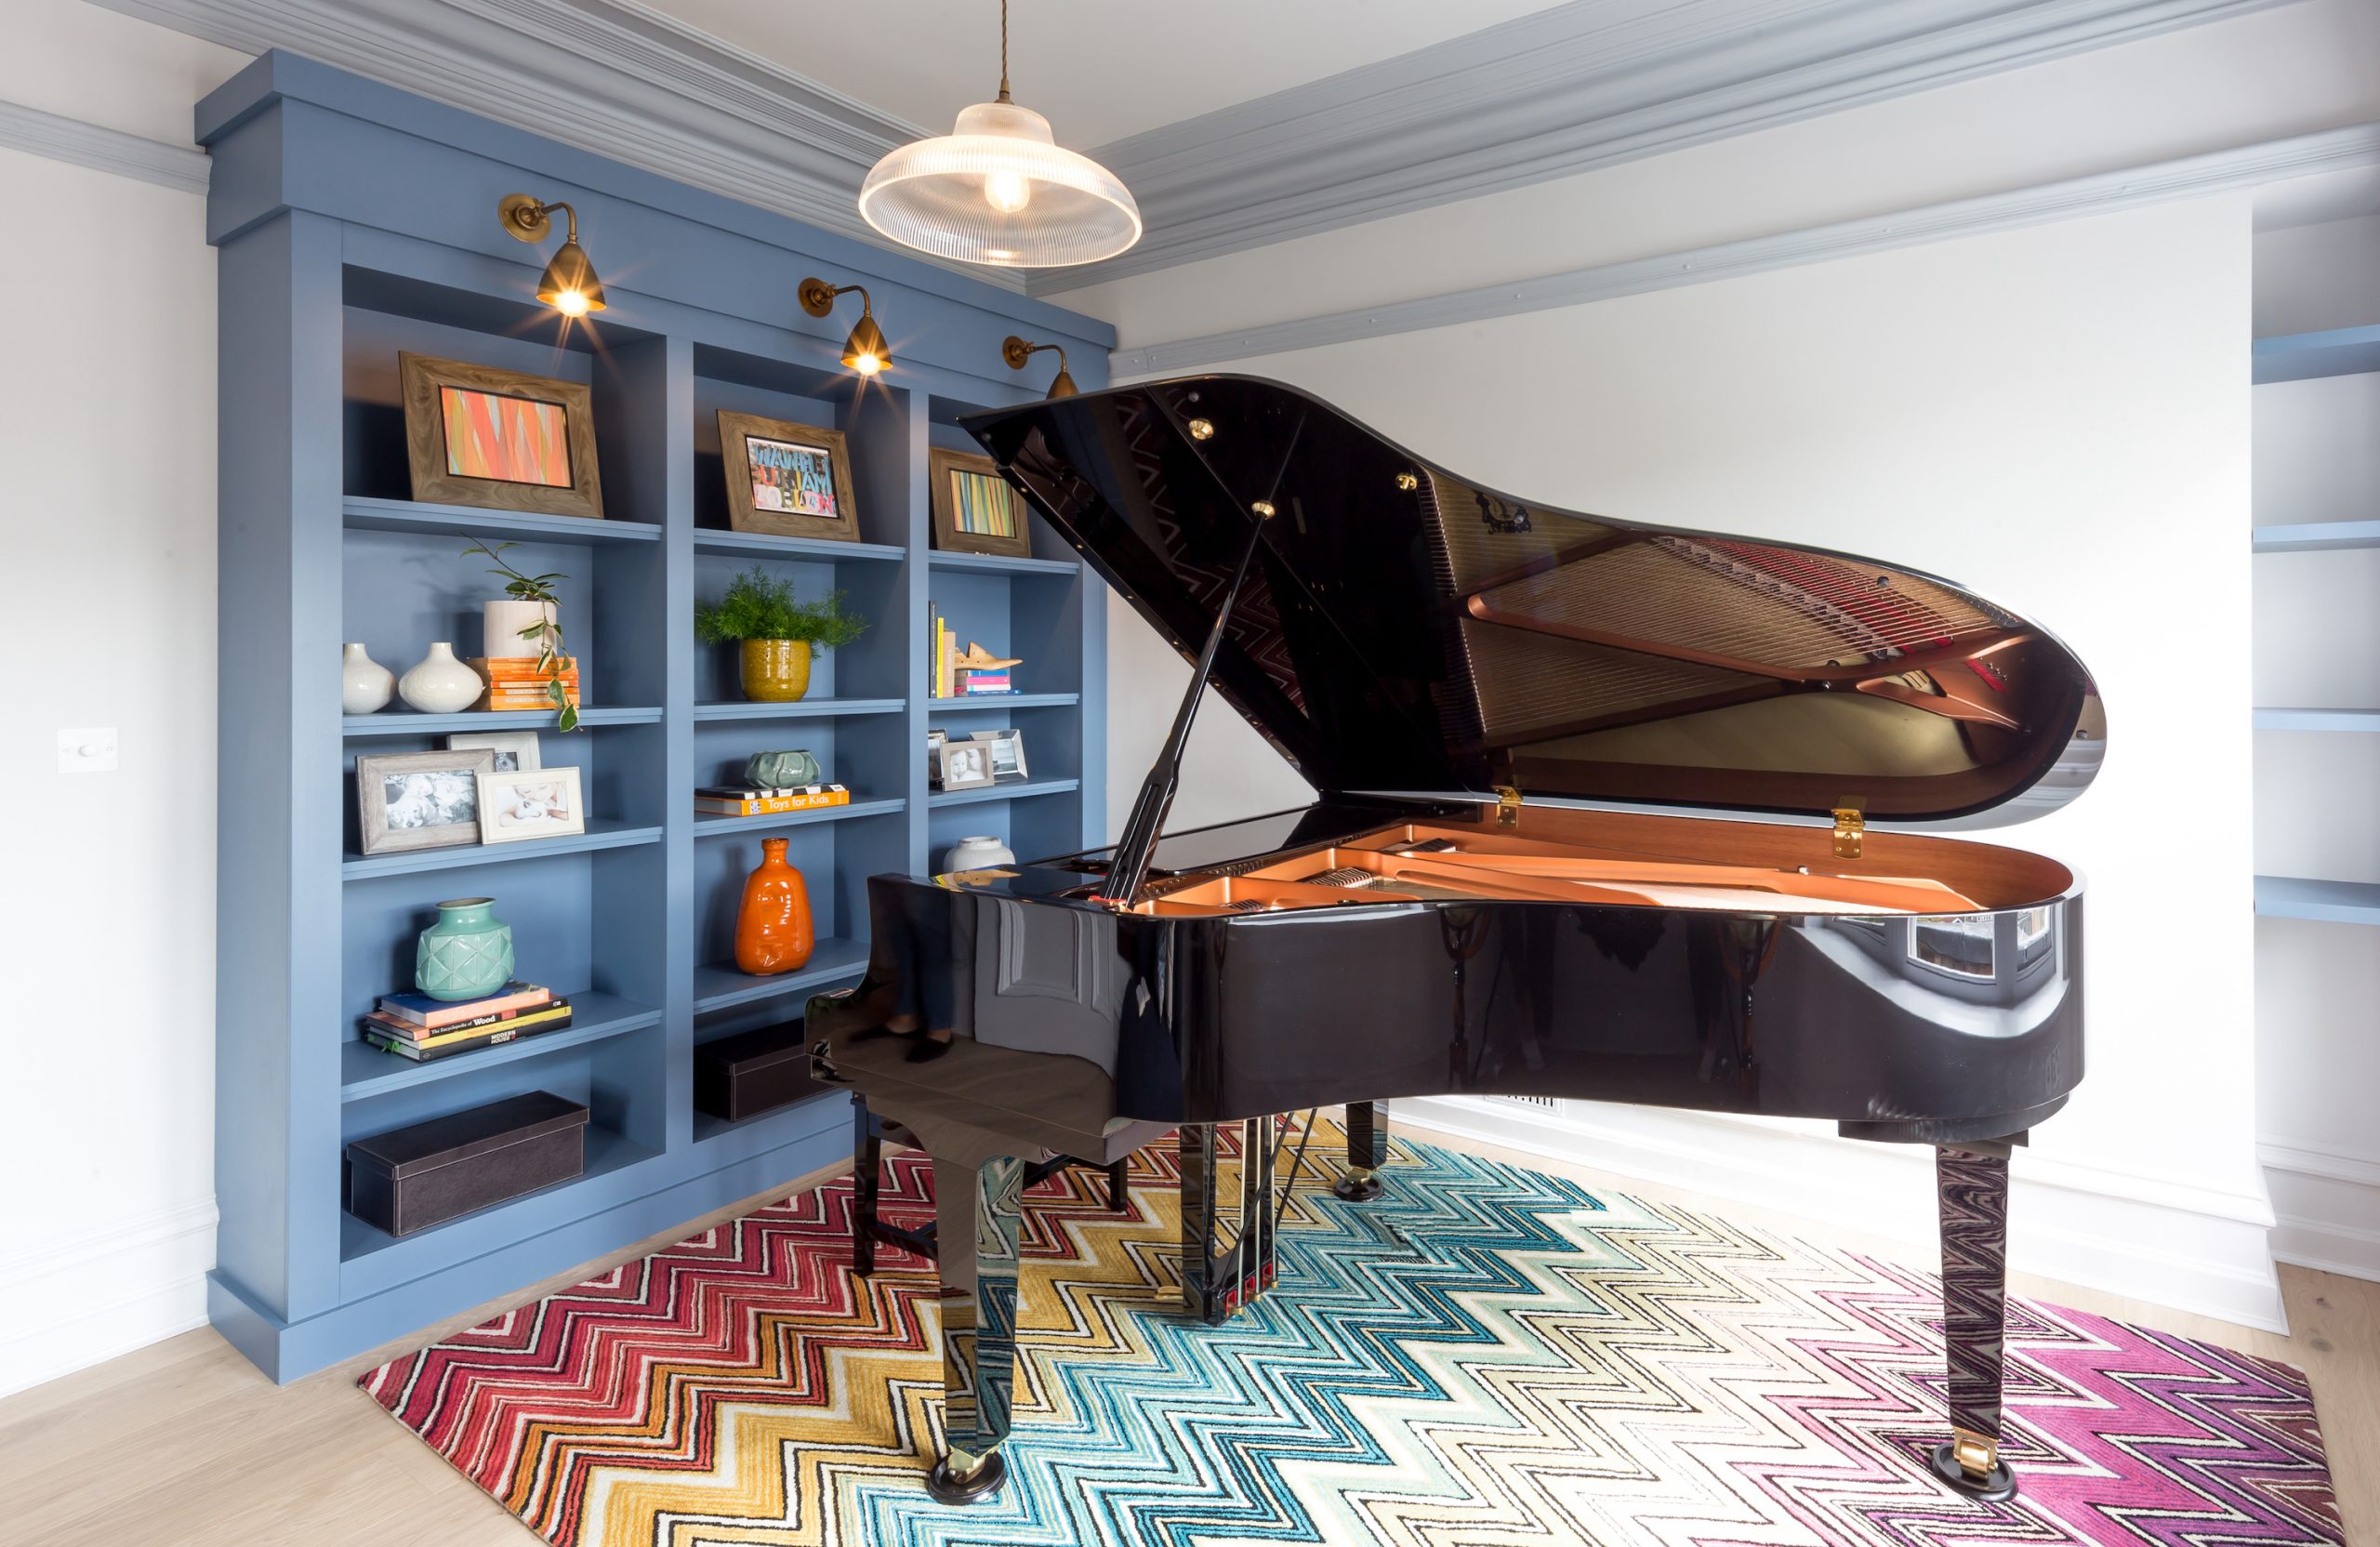 Bloomsbury Apartment - Music Room - Missoni Rug, Baby Grand Piano and Bespoke Joinery